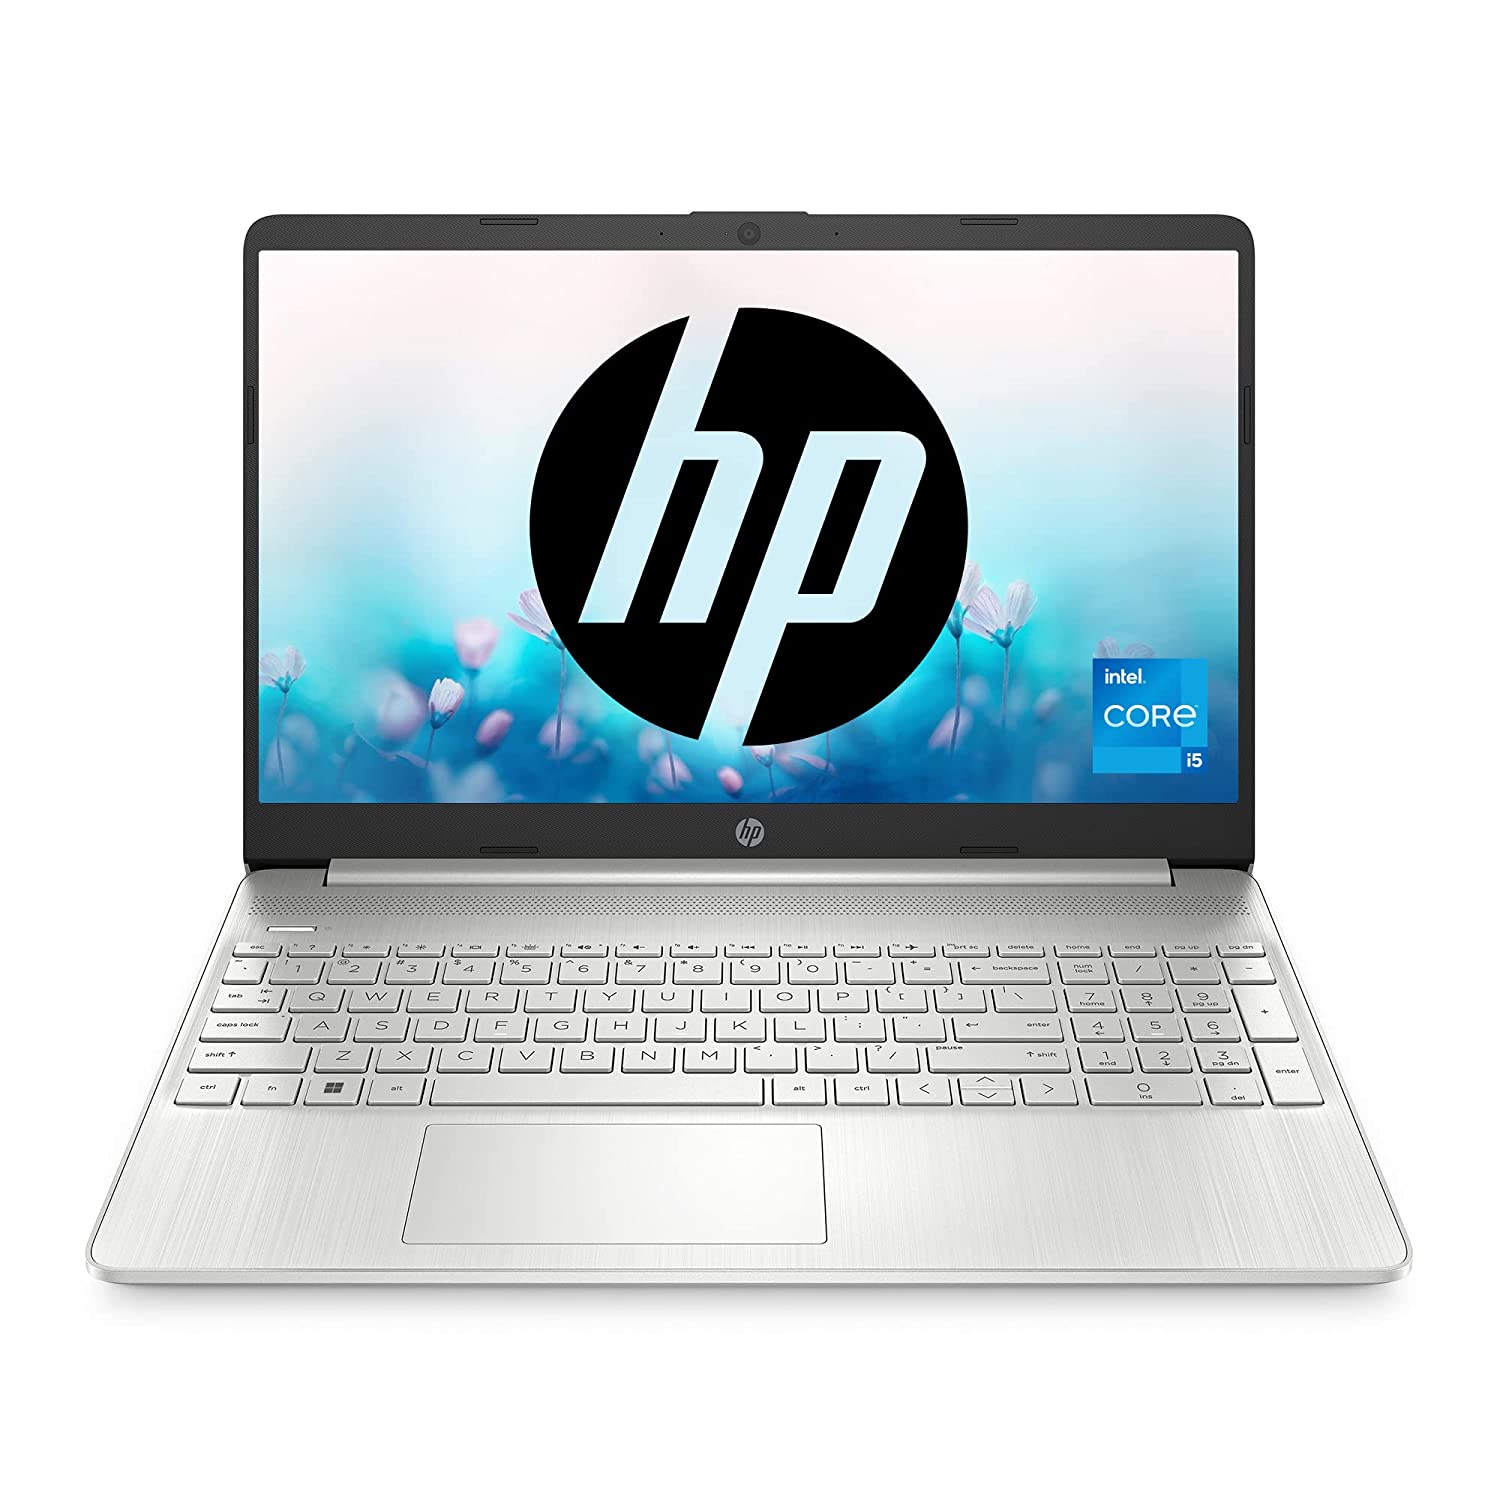 Hp 15s core i7 12th gen 8gb 512ssd 15.6"dos no touch natural silver